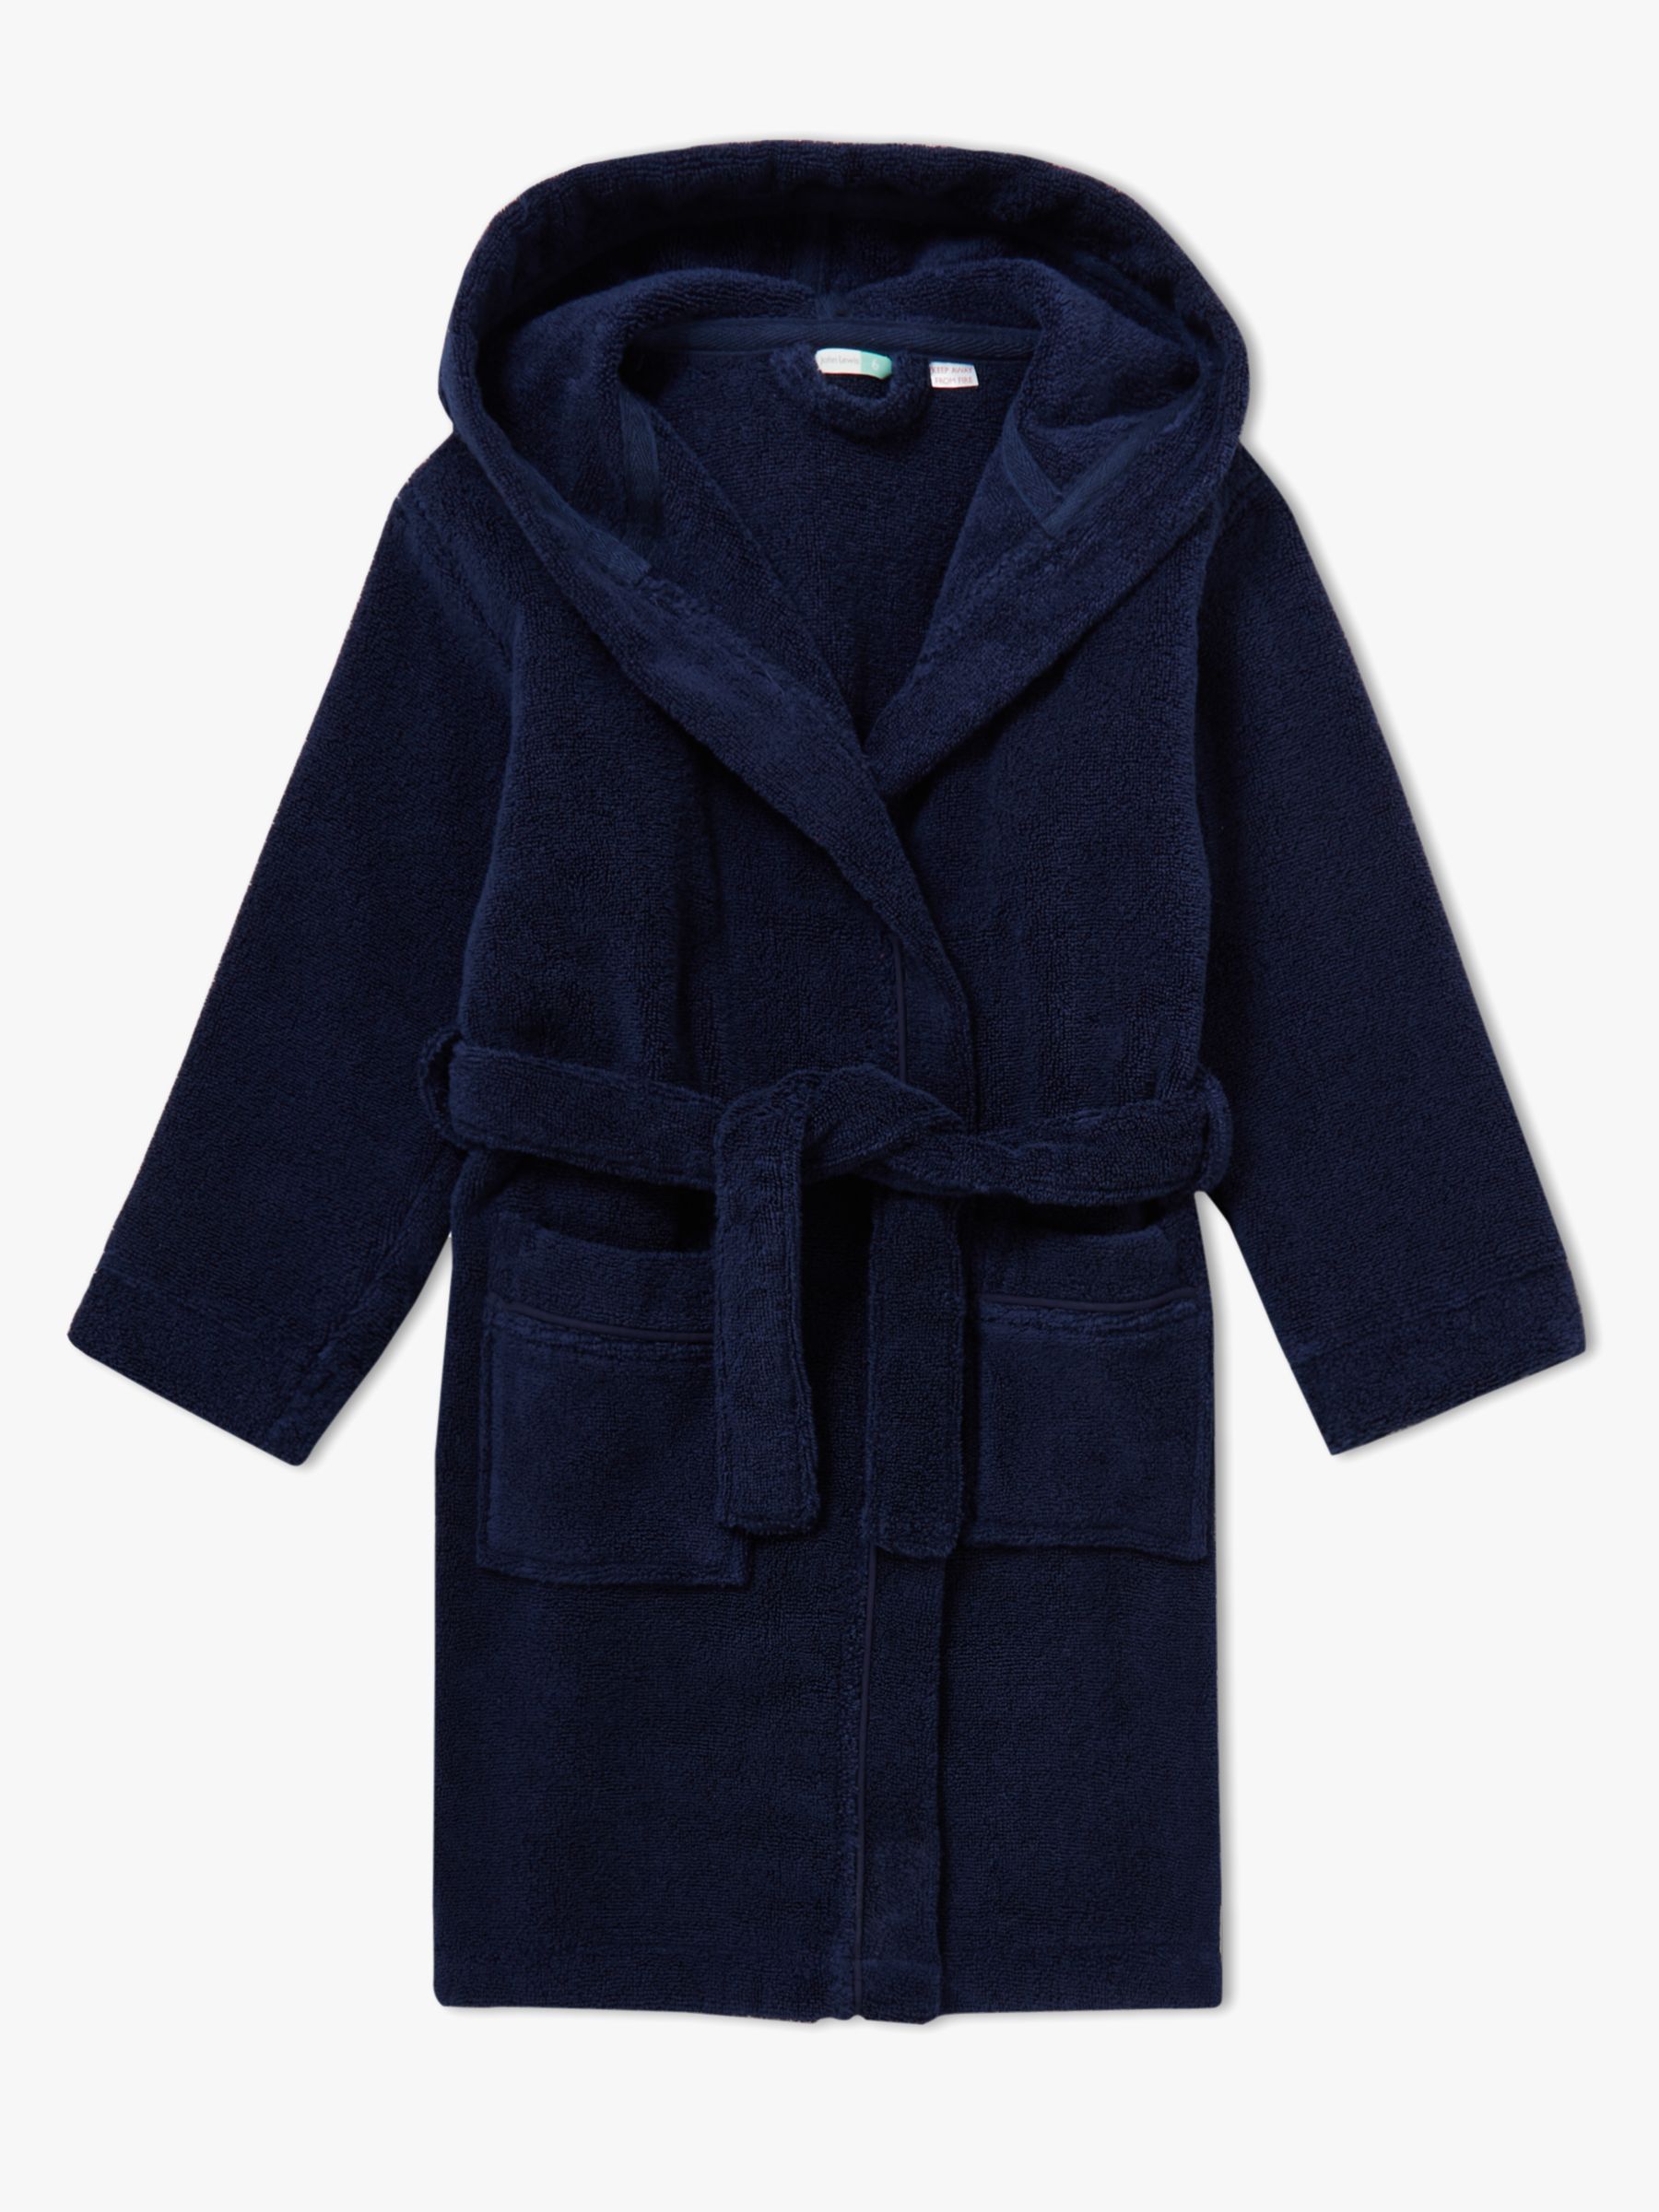 boys navy dressing gown